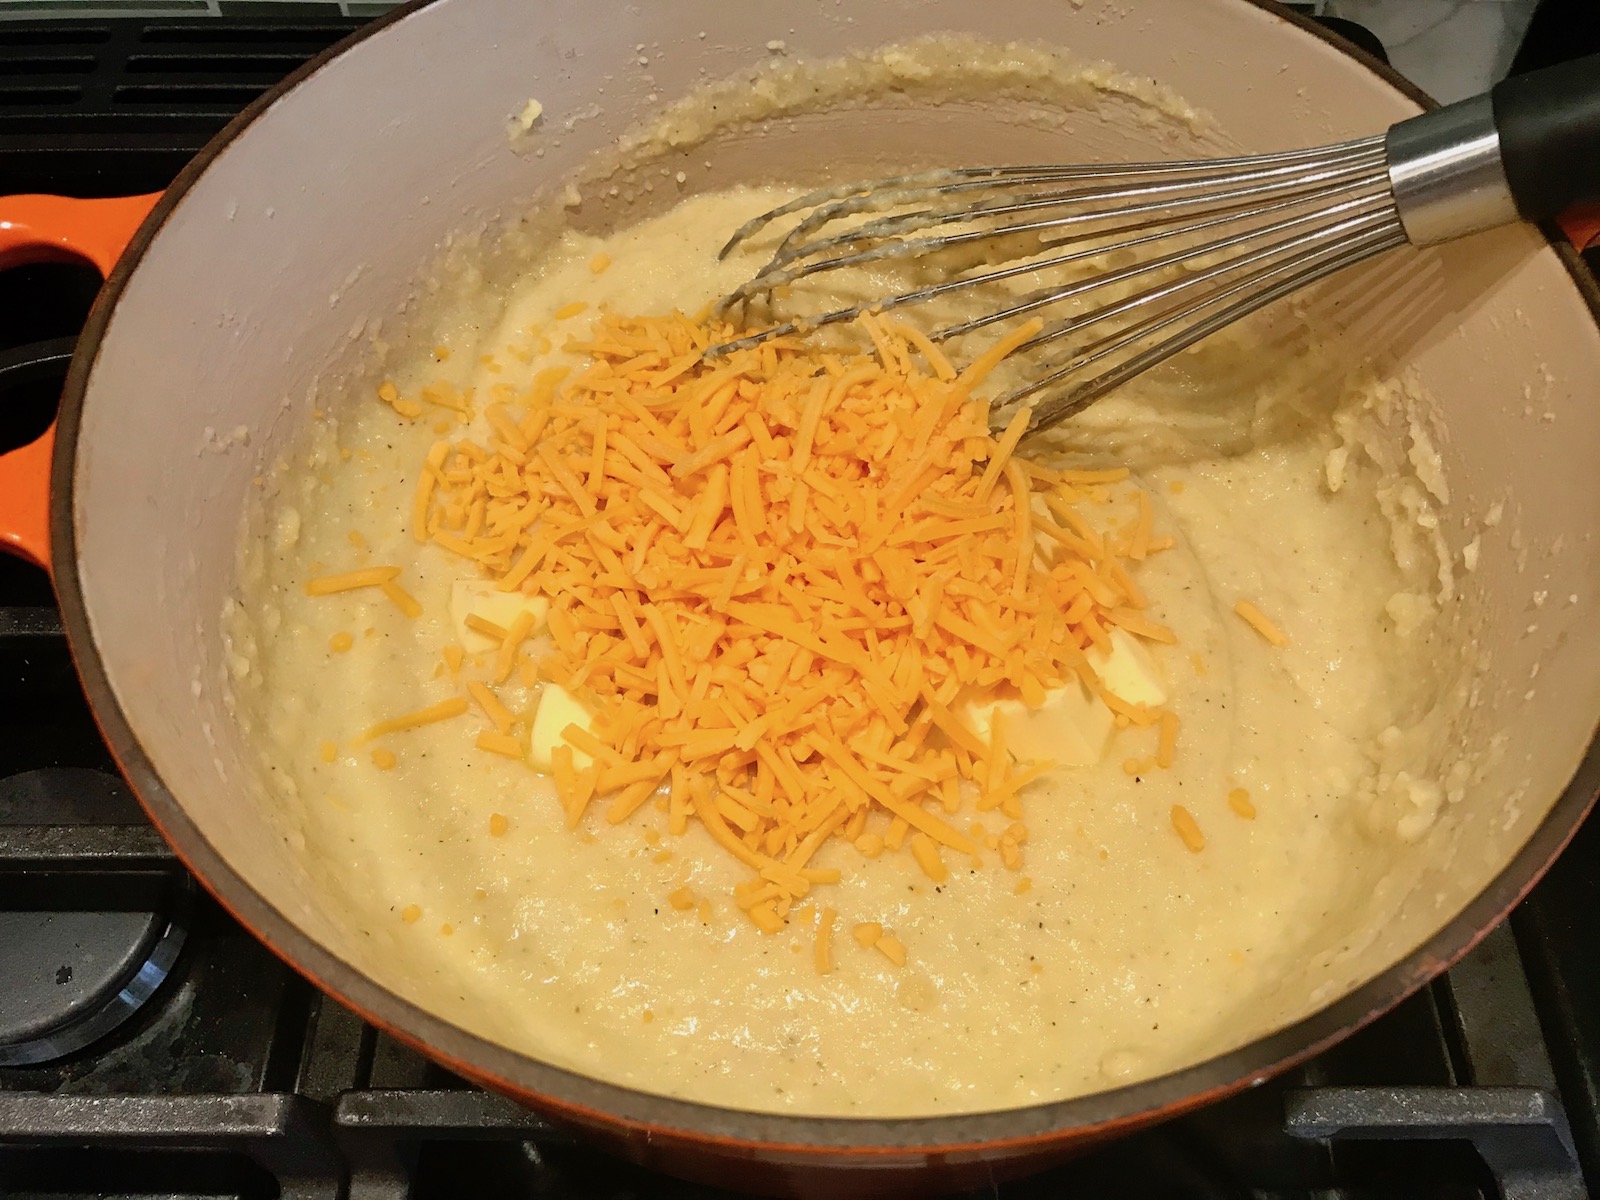  Whick mixing shredded cheddar into grits for Shrimp and Grits recipe. 